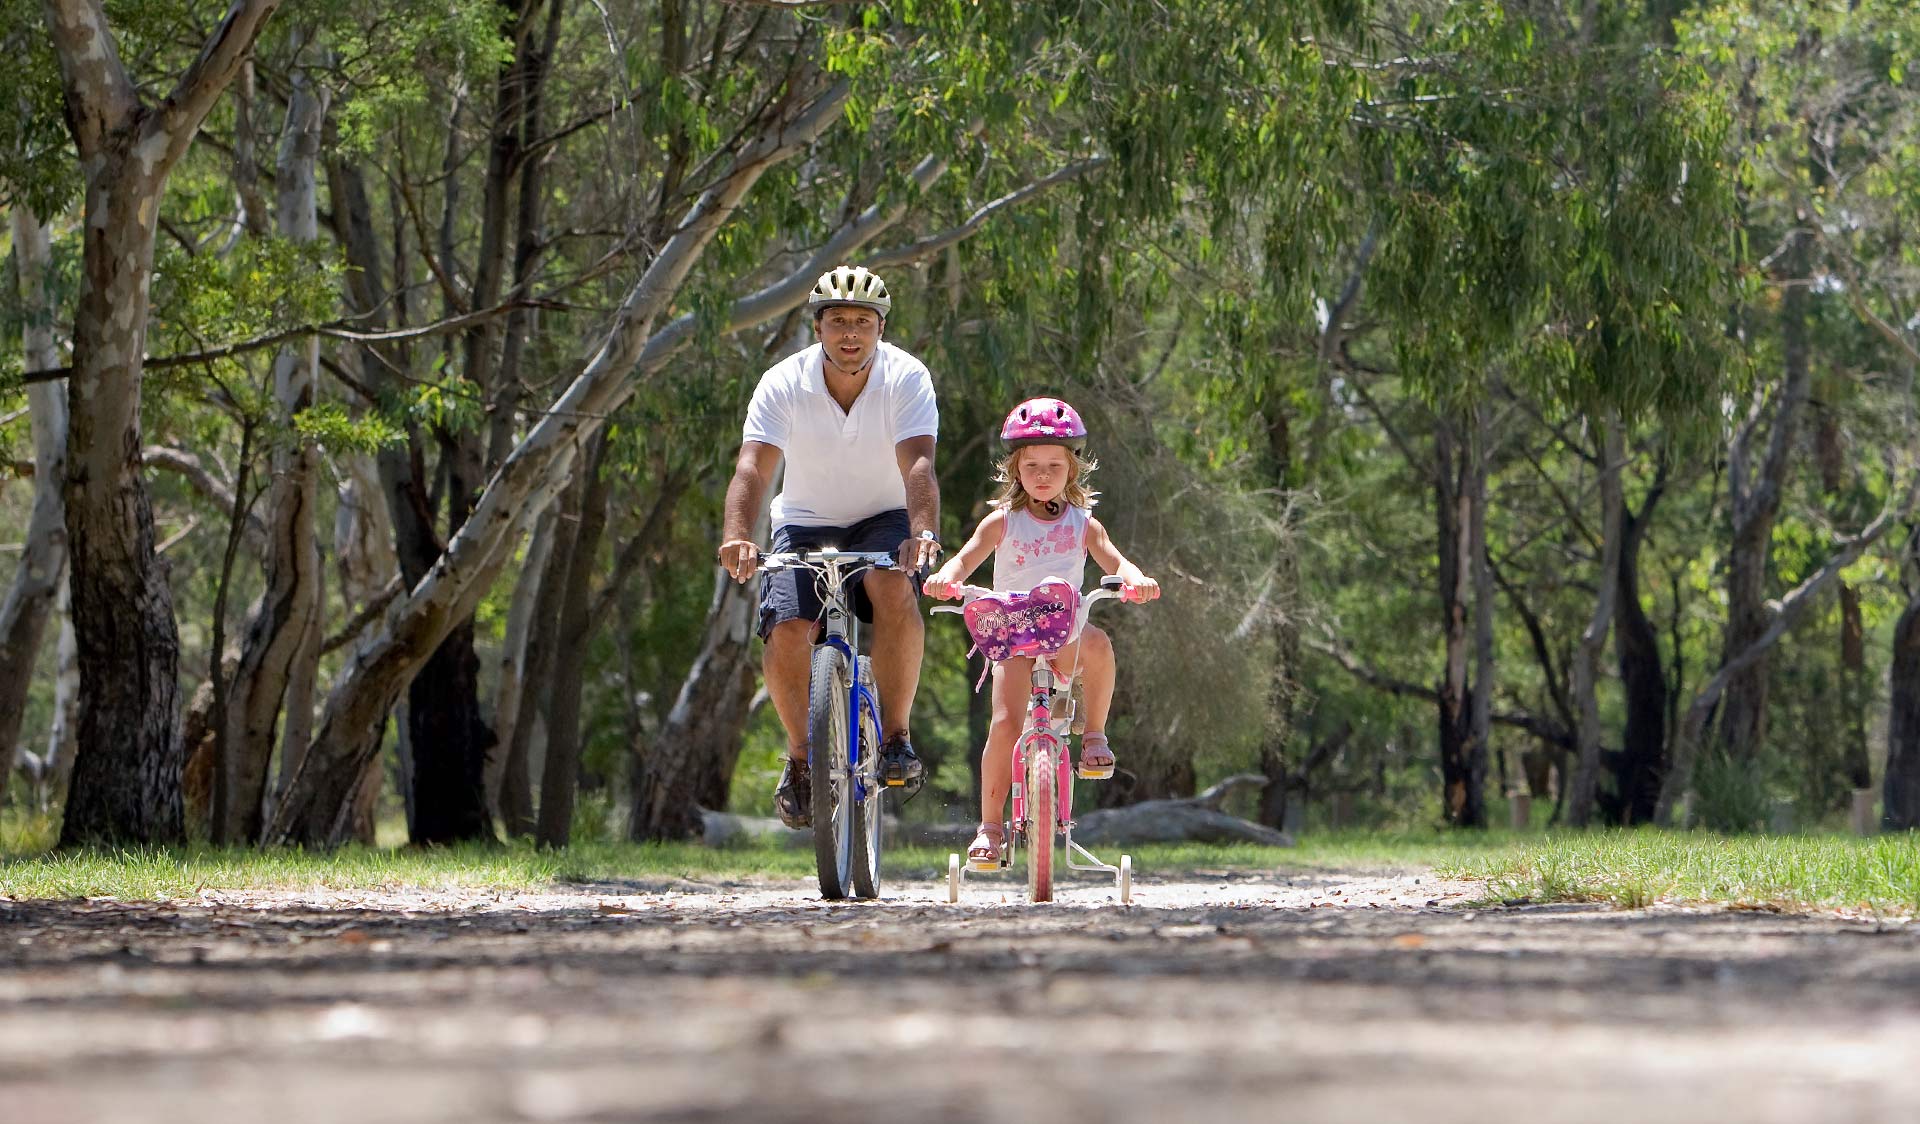 A father teaches his young daughter to ride a bike in Braeside Park.